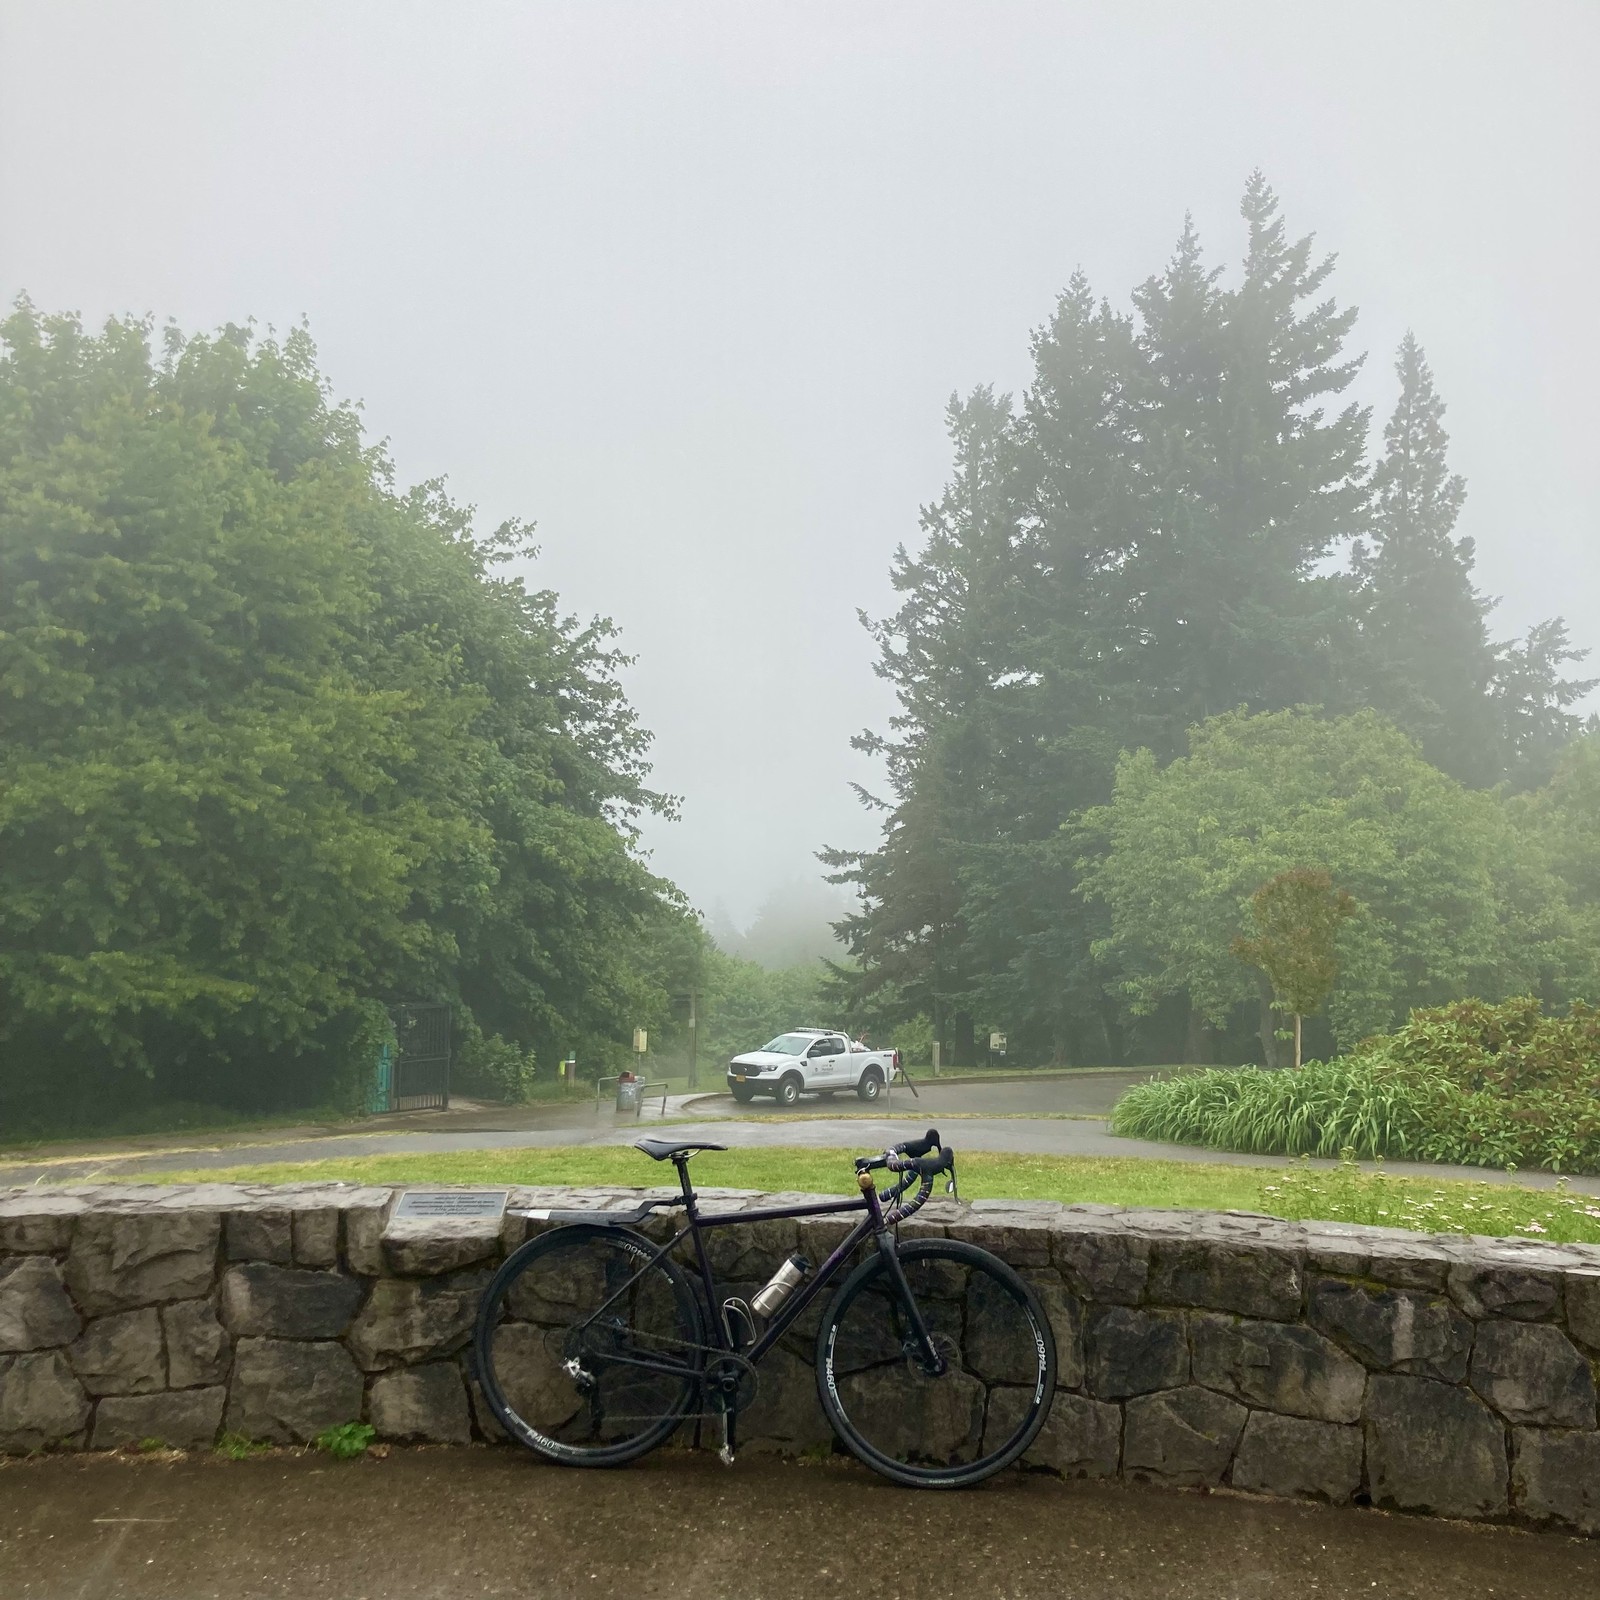 View from Council Crest Park toward Mt. Hood, which is obscured by rain and fog. In the foreground a bicycle leans against a low stone wall. Attached to the bicycle are a brass bell, a small battered steel coffee thermos, and a cheap plastic fender. About 50' distant is a PP&R pickup with gardening equipment. The entire scene is wet and brilliant with lush vegetation.